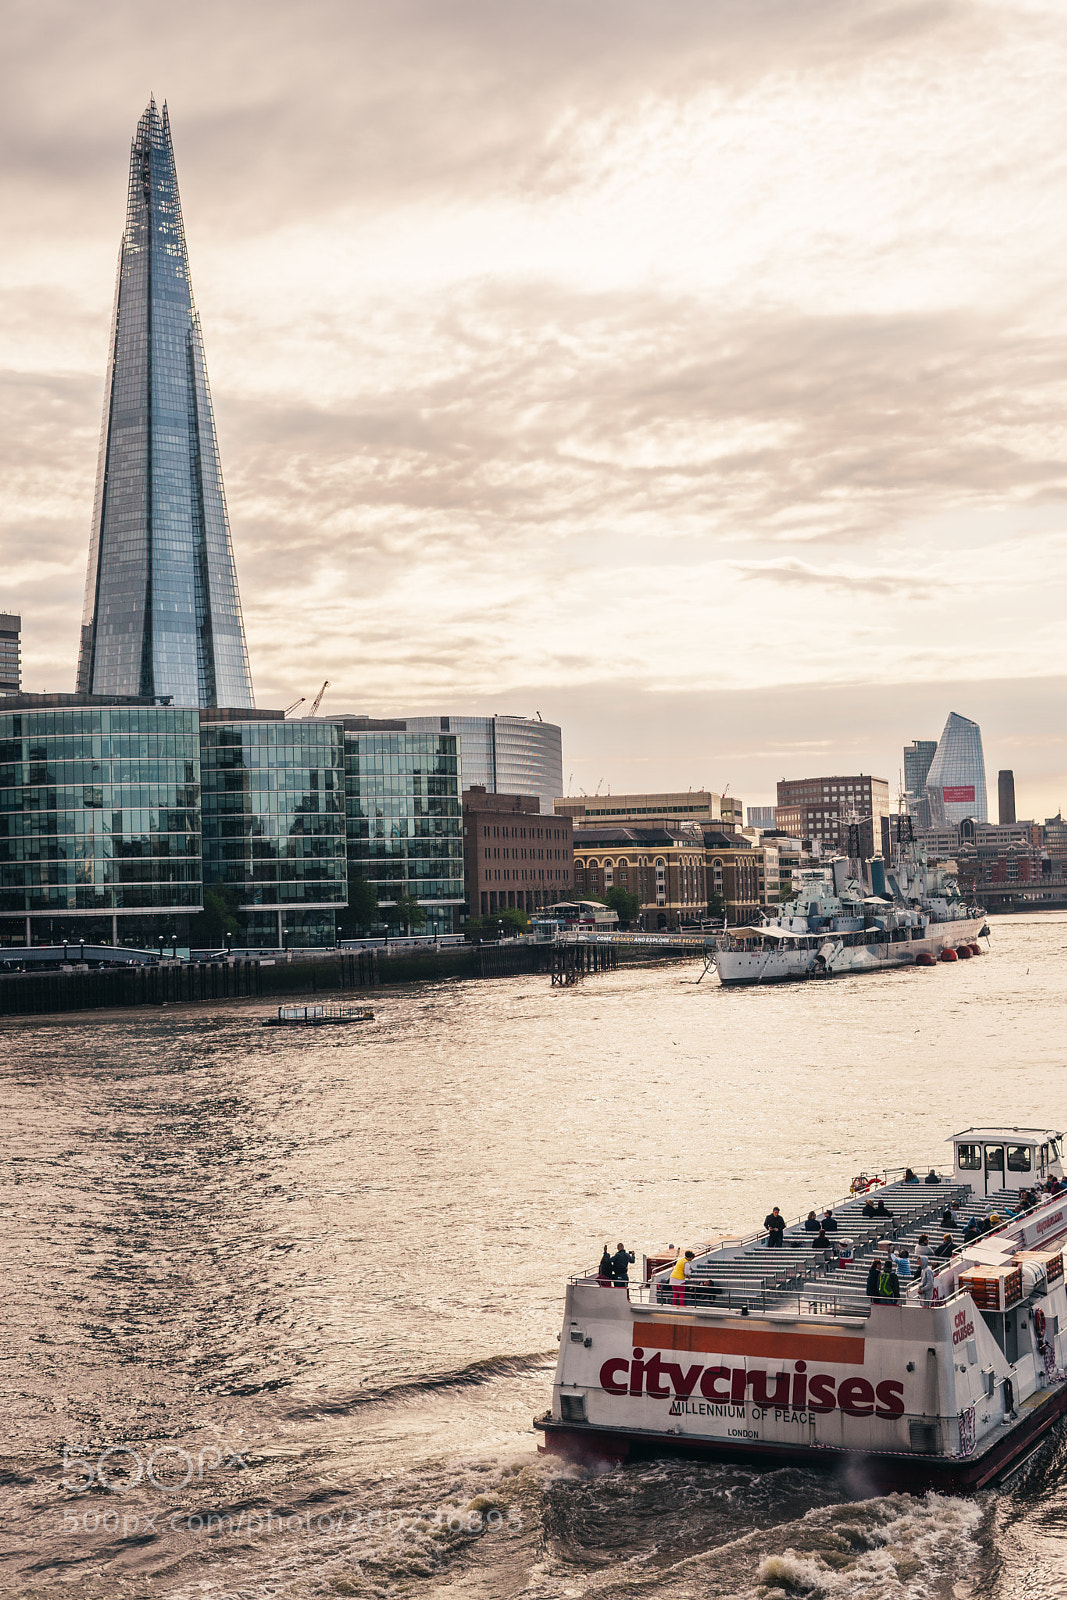 Sony a7 II sample photo. The shard from tower photography